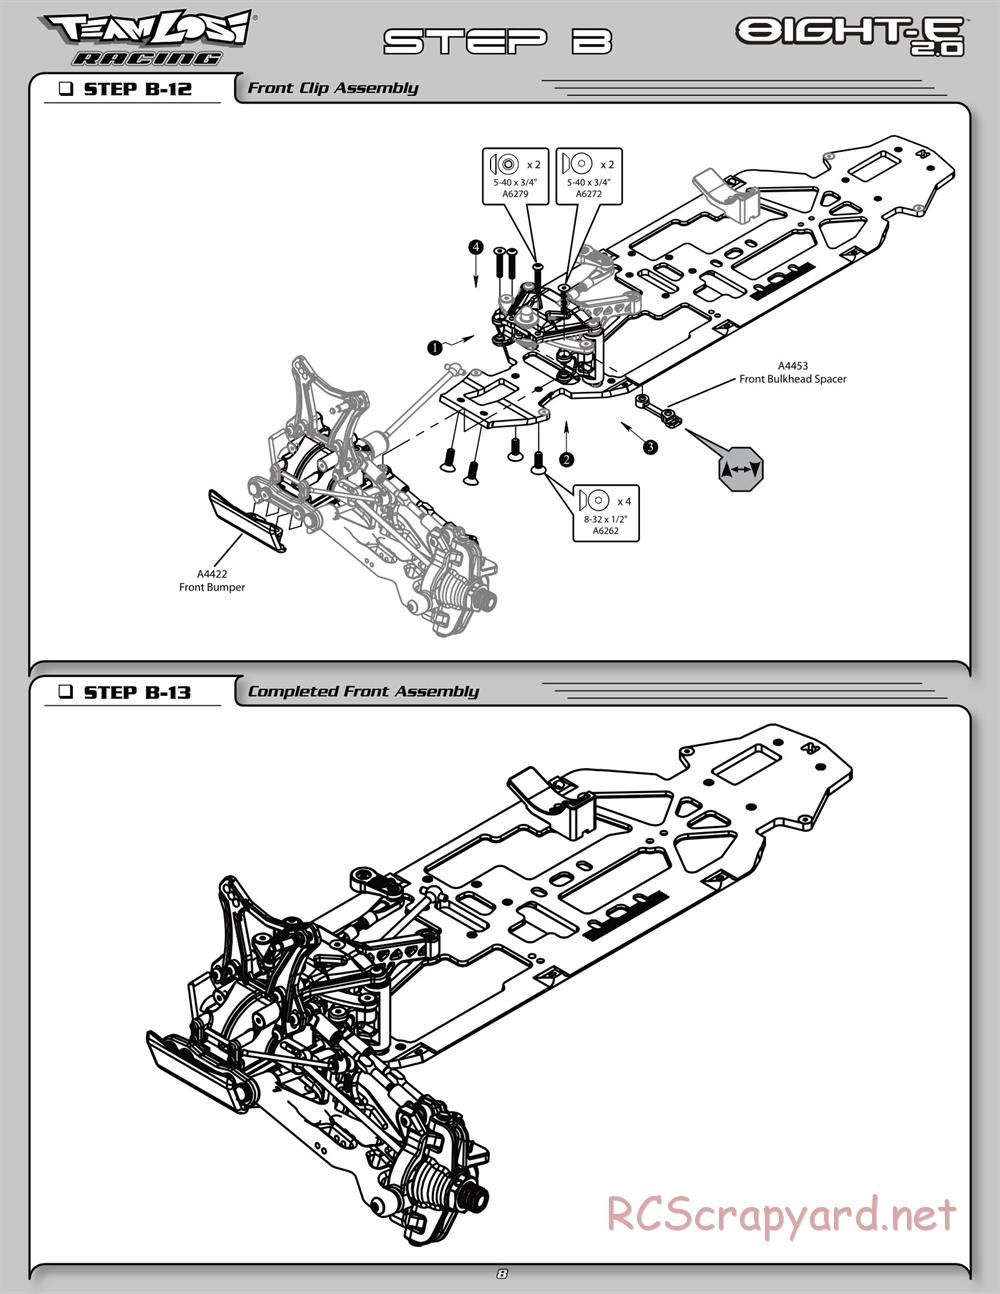 Team Losi - 8ight-E 2.0 Race Roller - Manual - Page 15